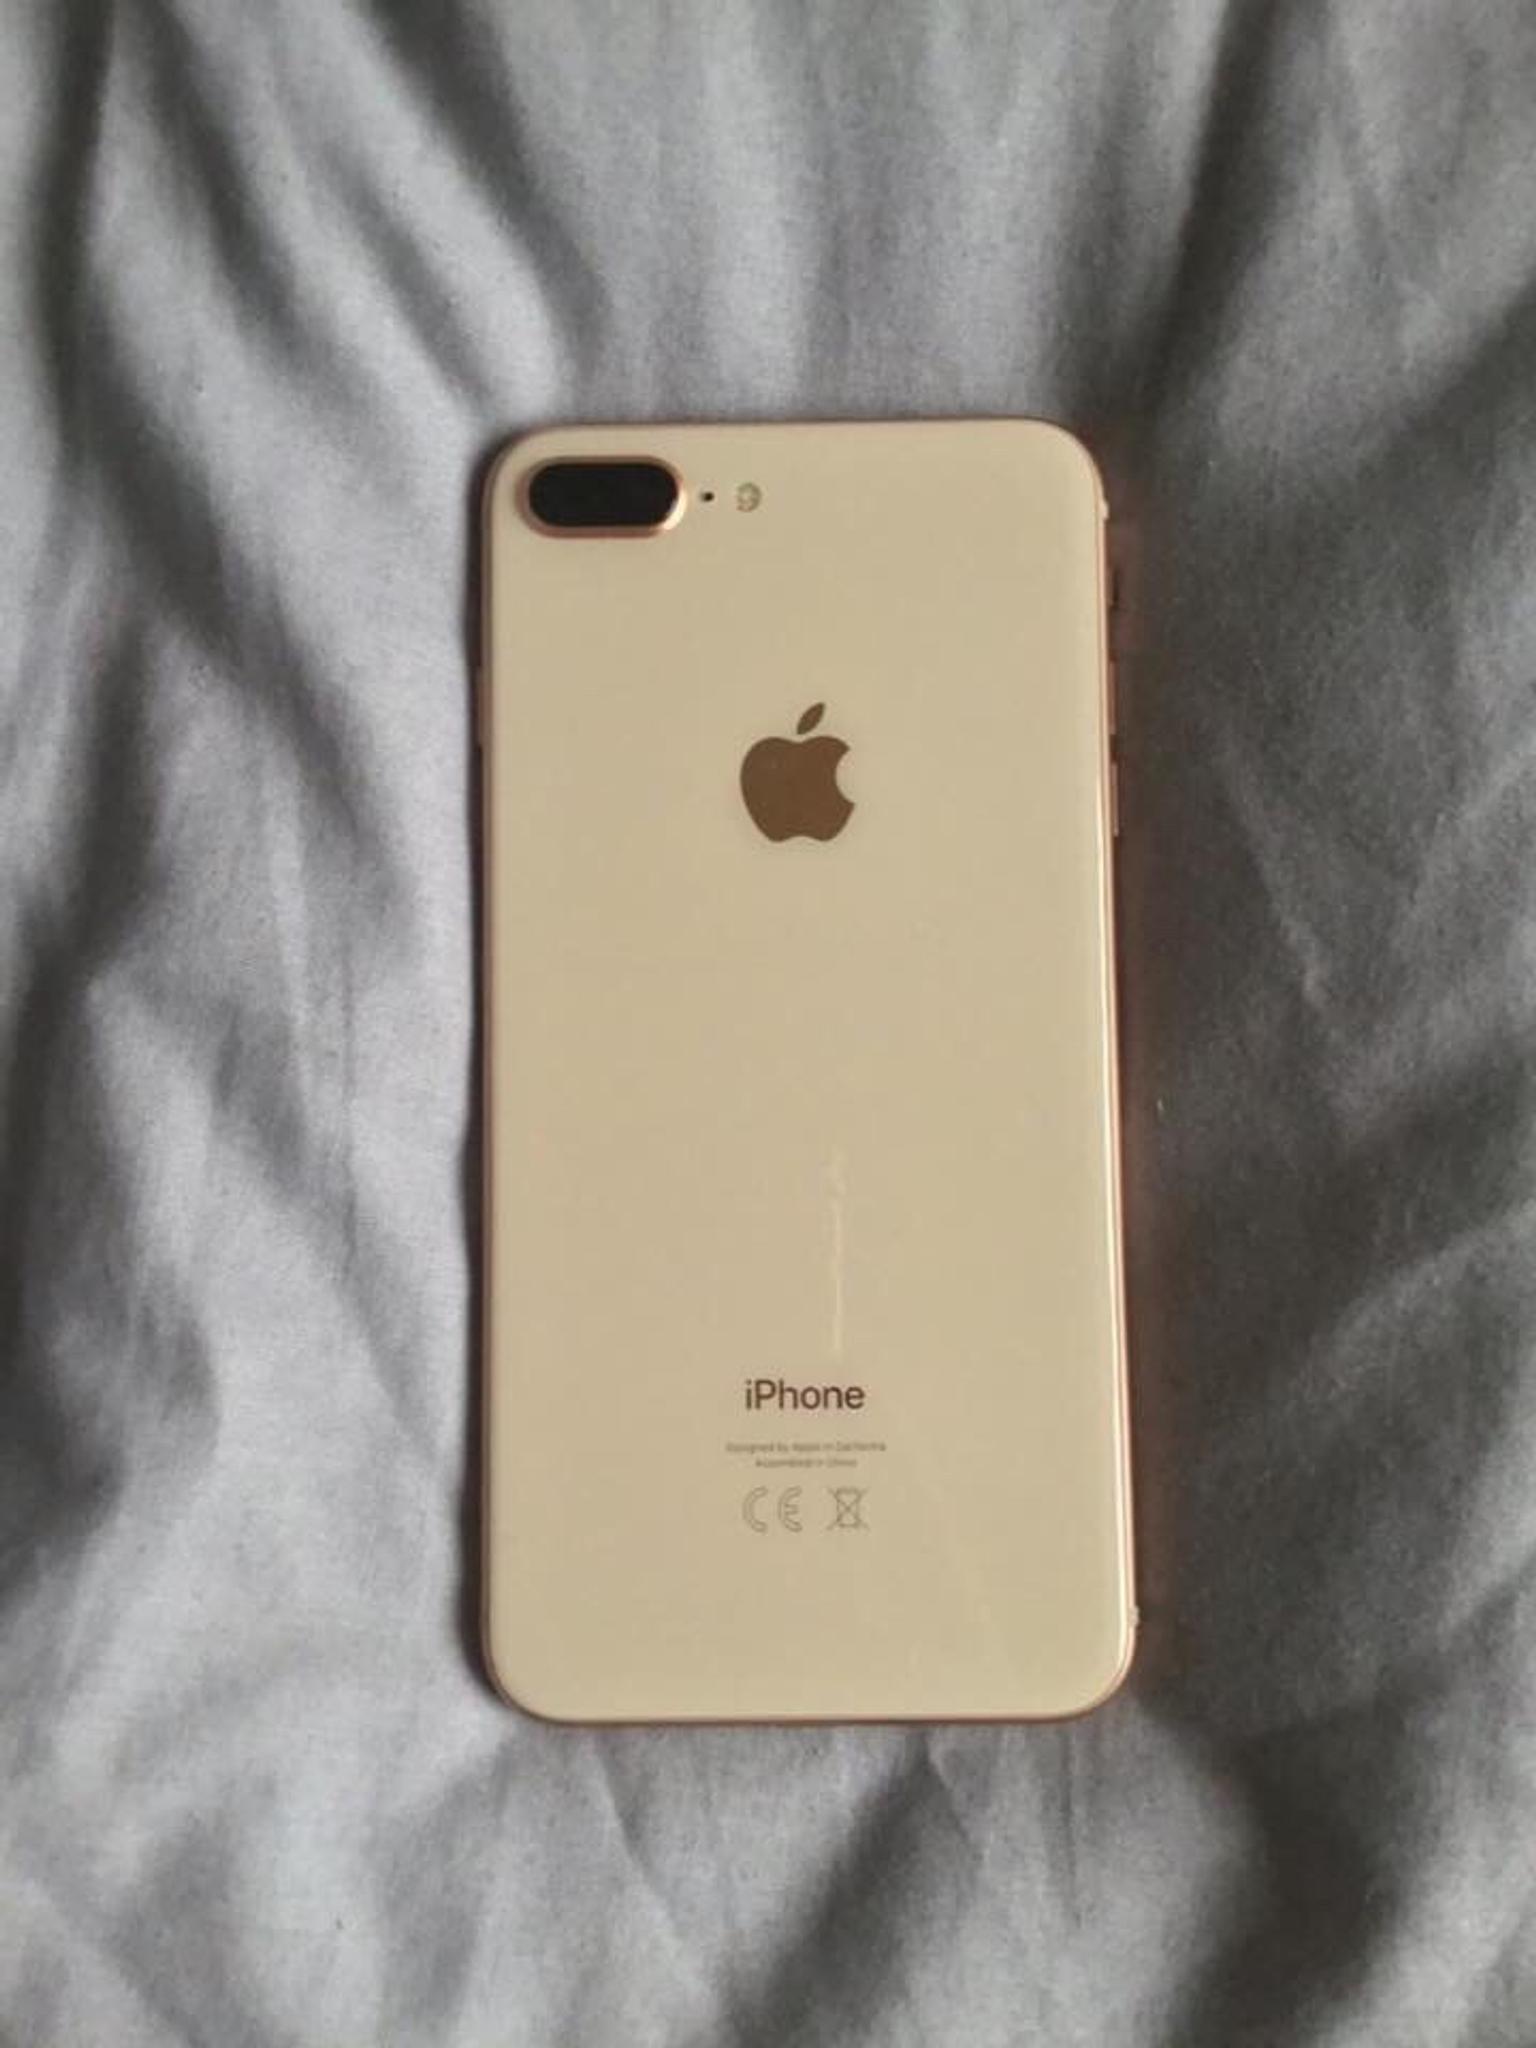 iPhone 8 Plus gold 64GB in NG19 Nottinghamshire for £400.00 for sale